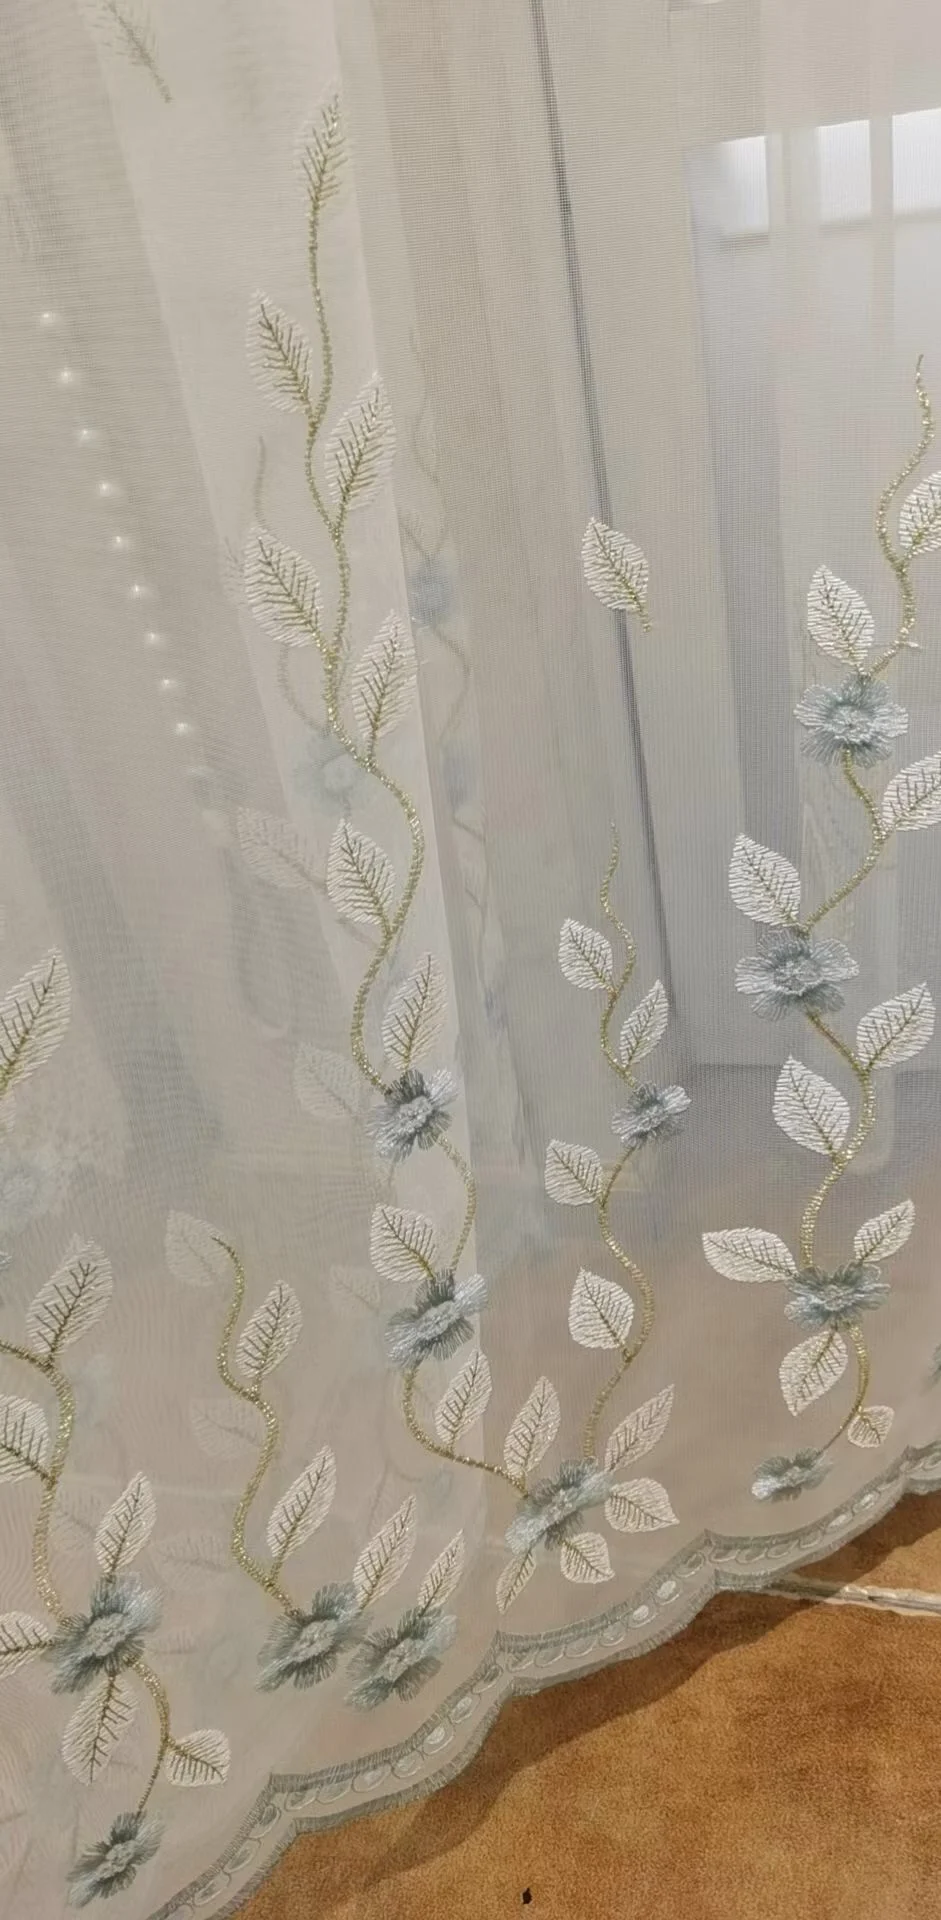 

Pastoral Romantic Window Screen Luxury Leaf Lace Embroidery Tulle For Living Room Bedroom Balcony White Sheer Curtain